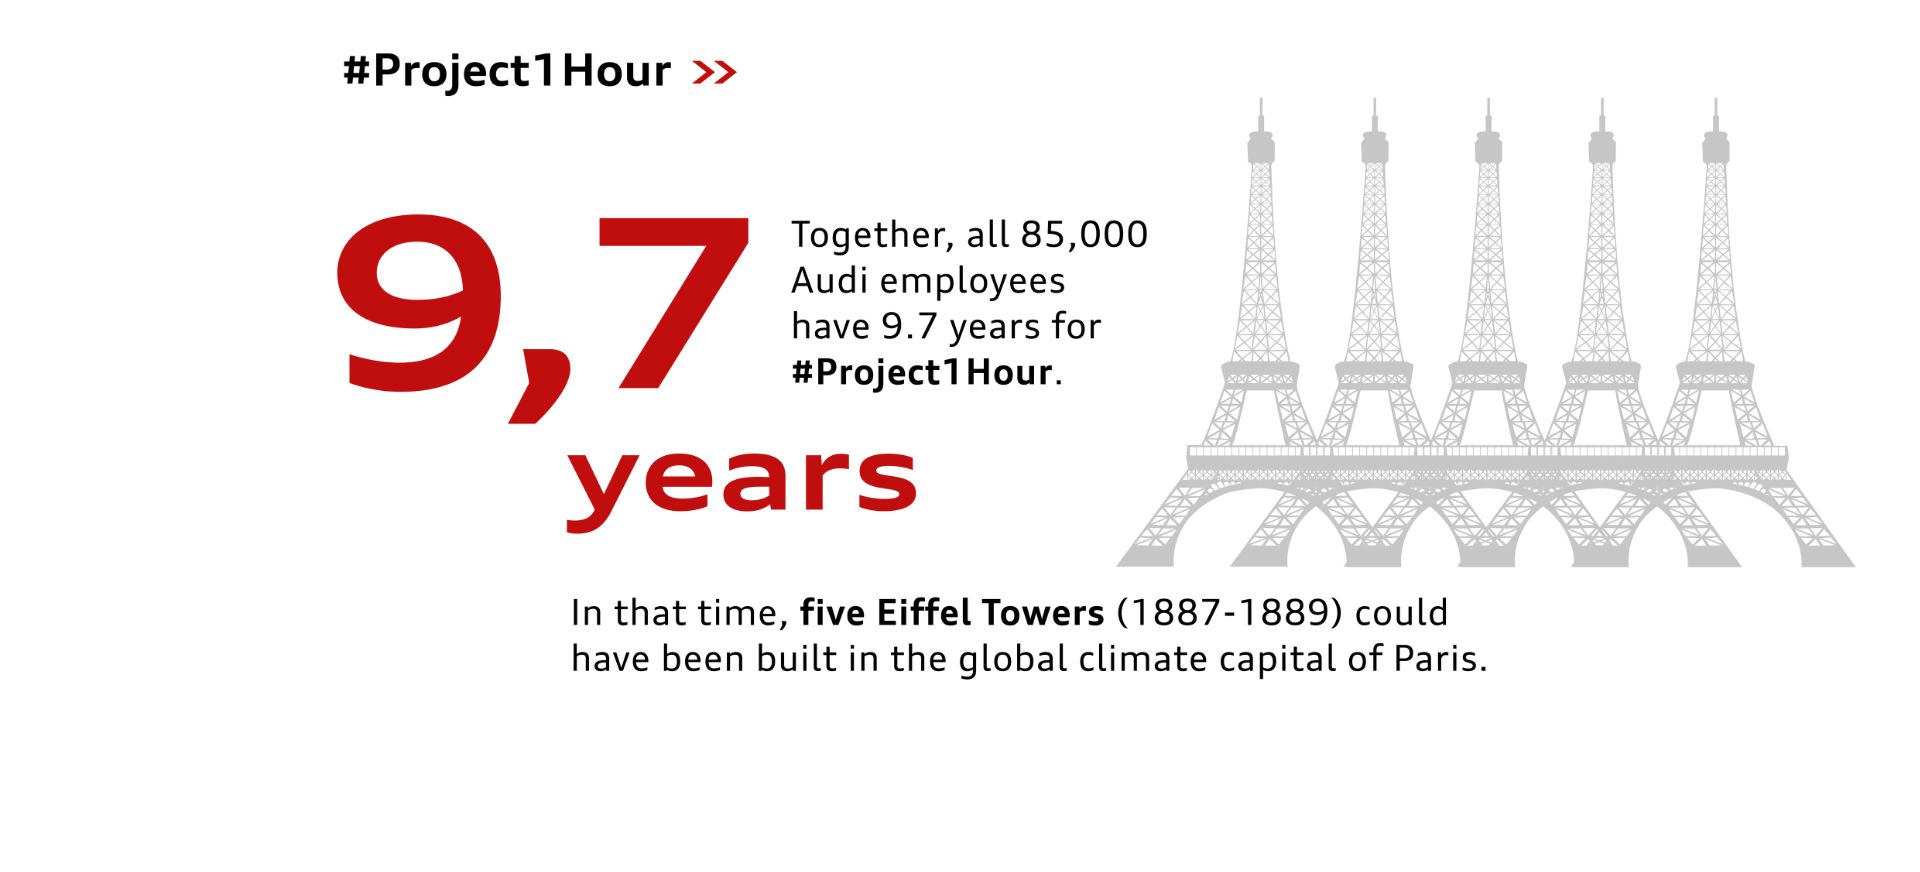 Around 85,000 Audi employees participated in #Project1Hour. That translates into nearly 10 years of discussions and conversations on the issue of environmental protection.